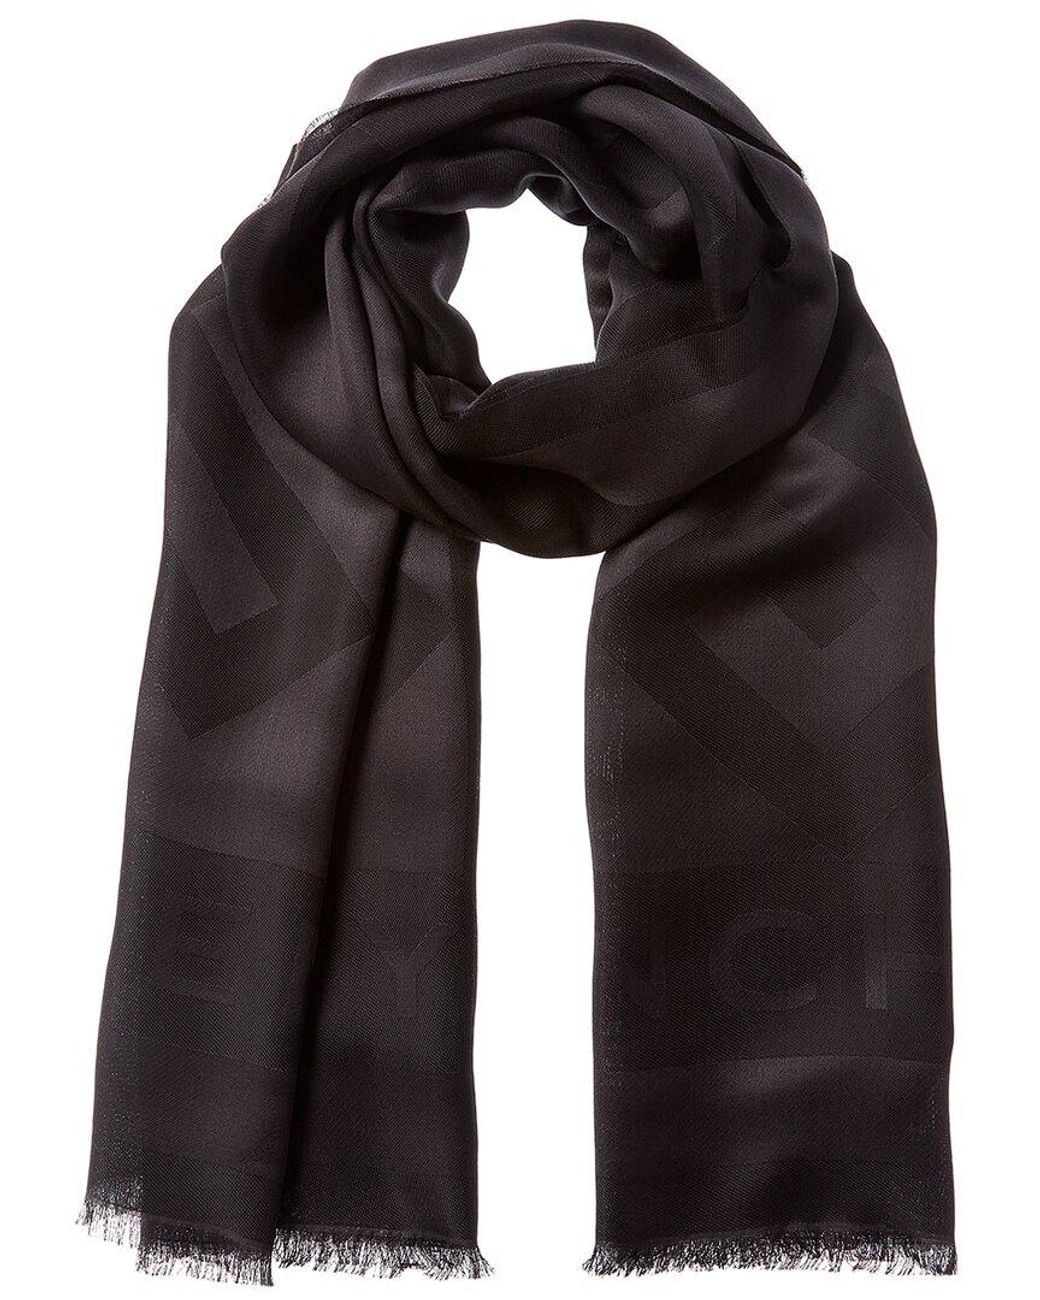 Givenchy G Monogram Wool & Cashmere-blend Scarf in Black | Lyst